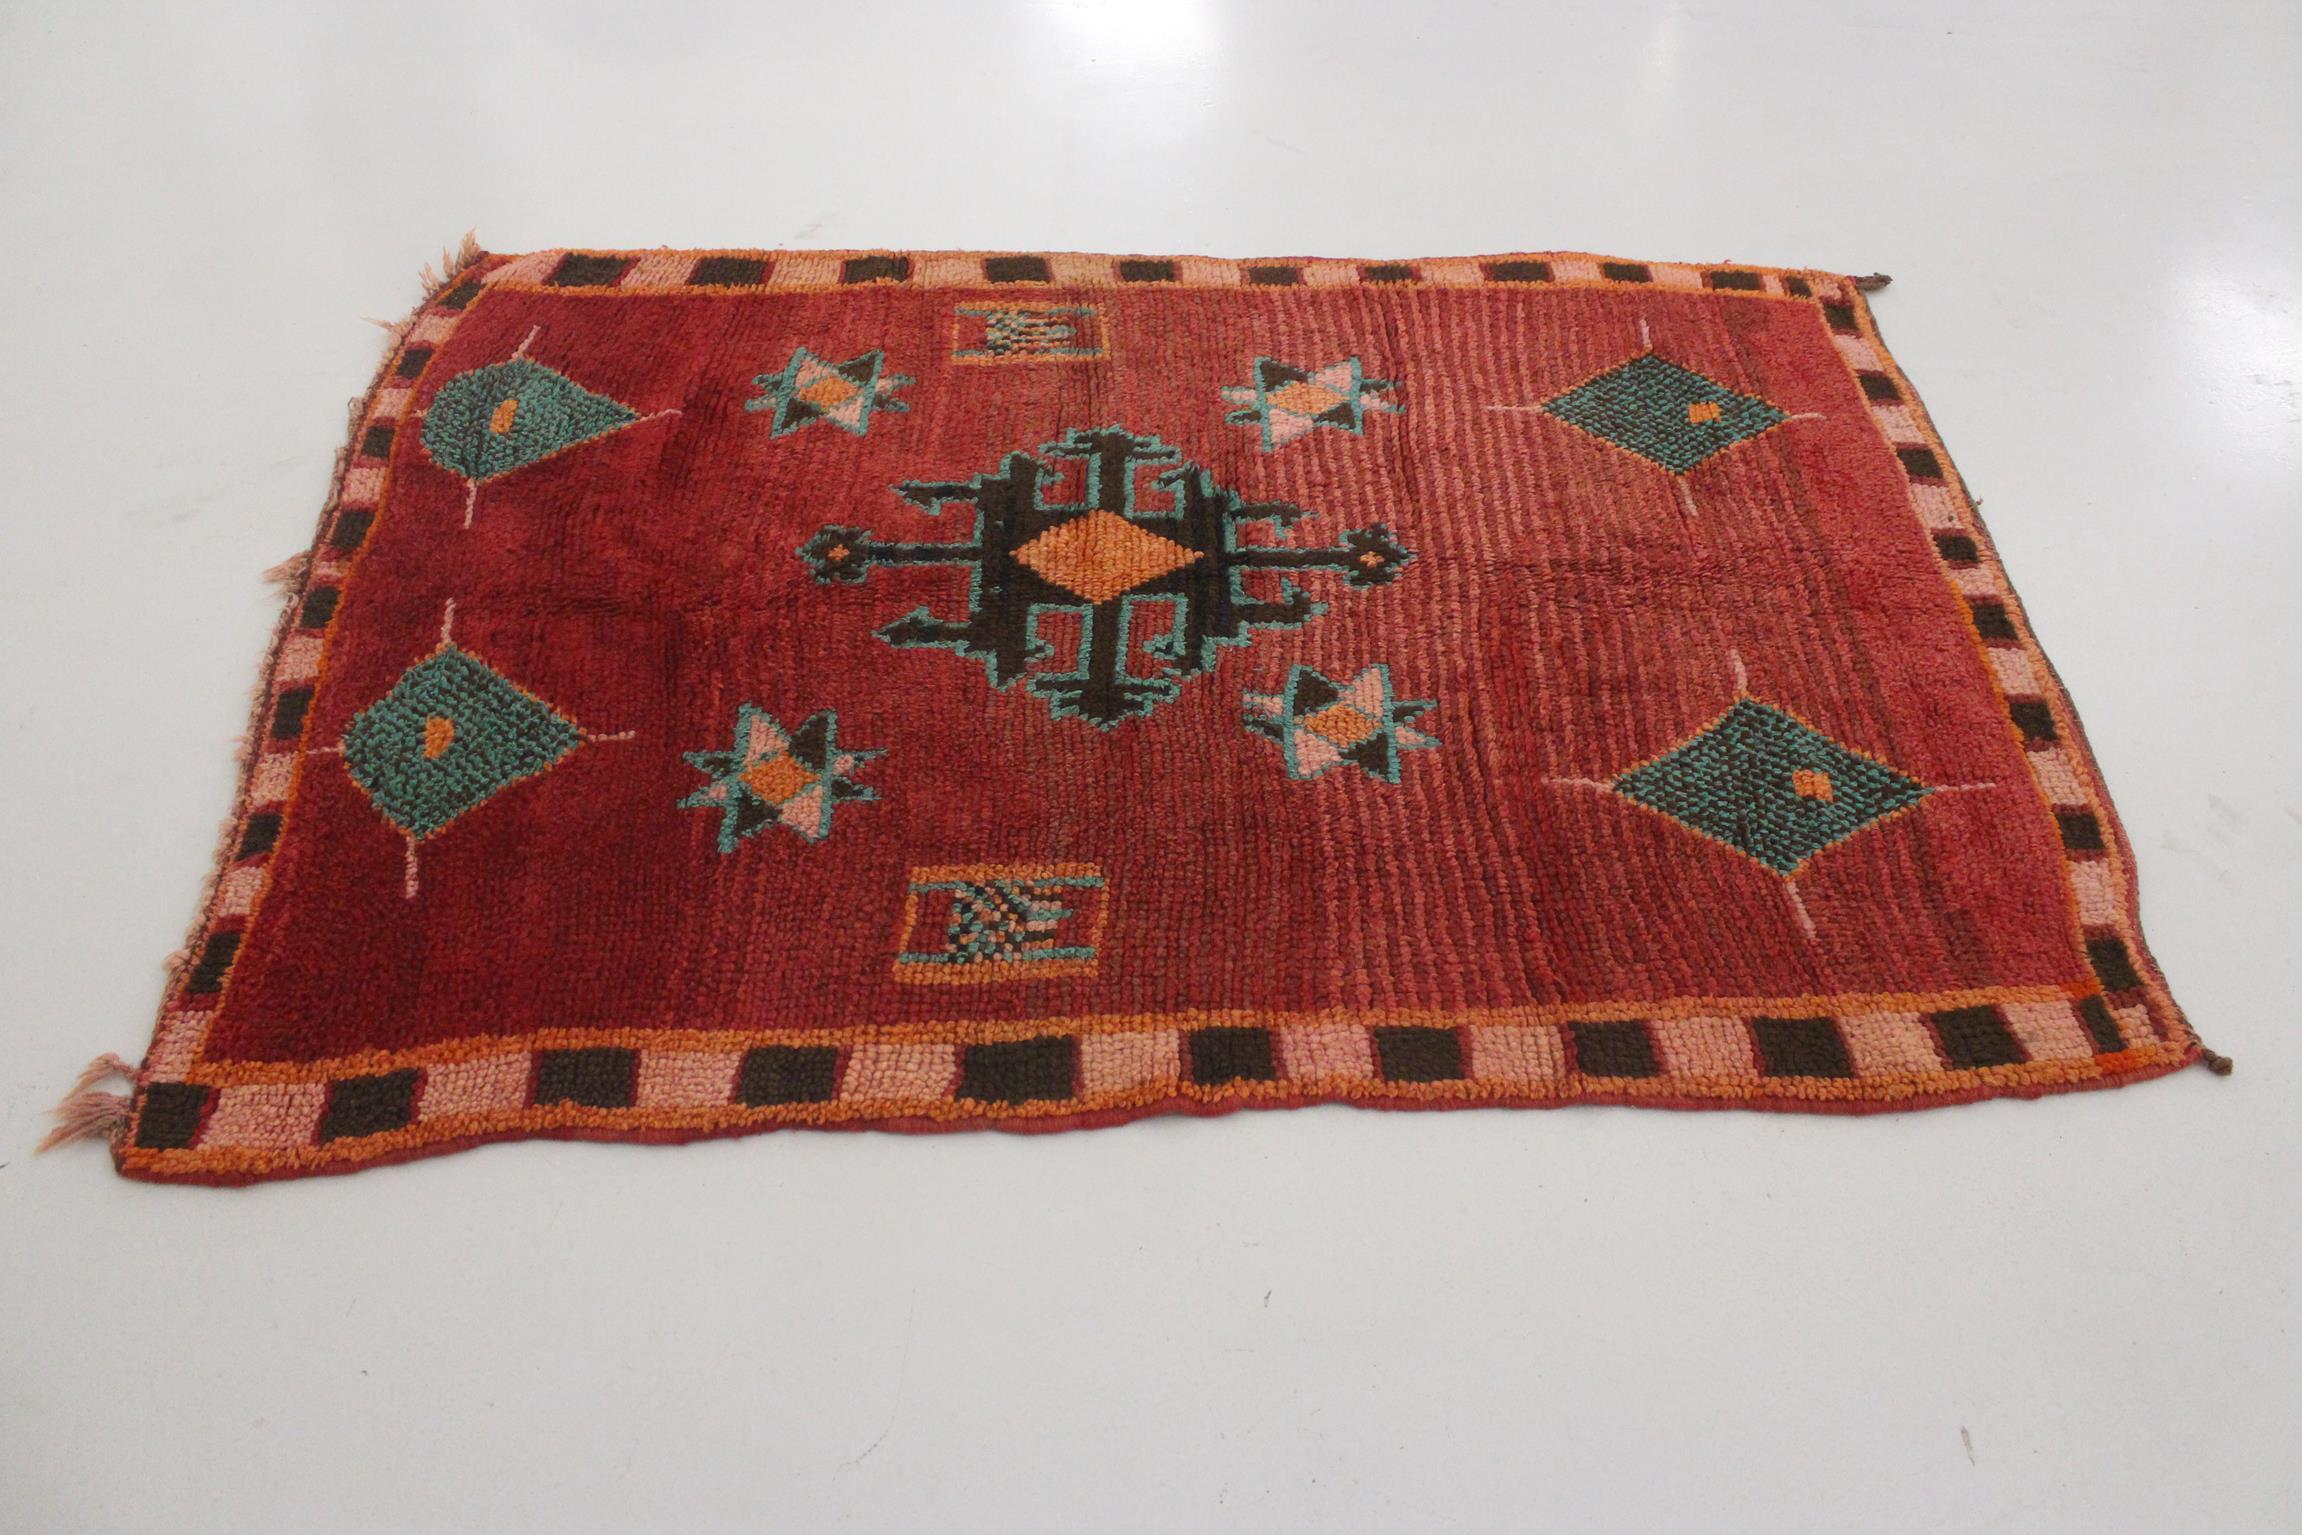 Tribal Vintage Moroccan Azilal rug - Red and turquoise - 4.1x5.8feet / 127x177cm For Sale